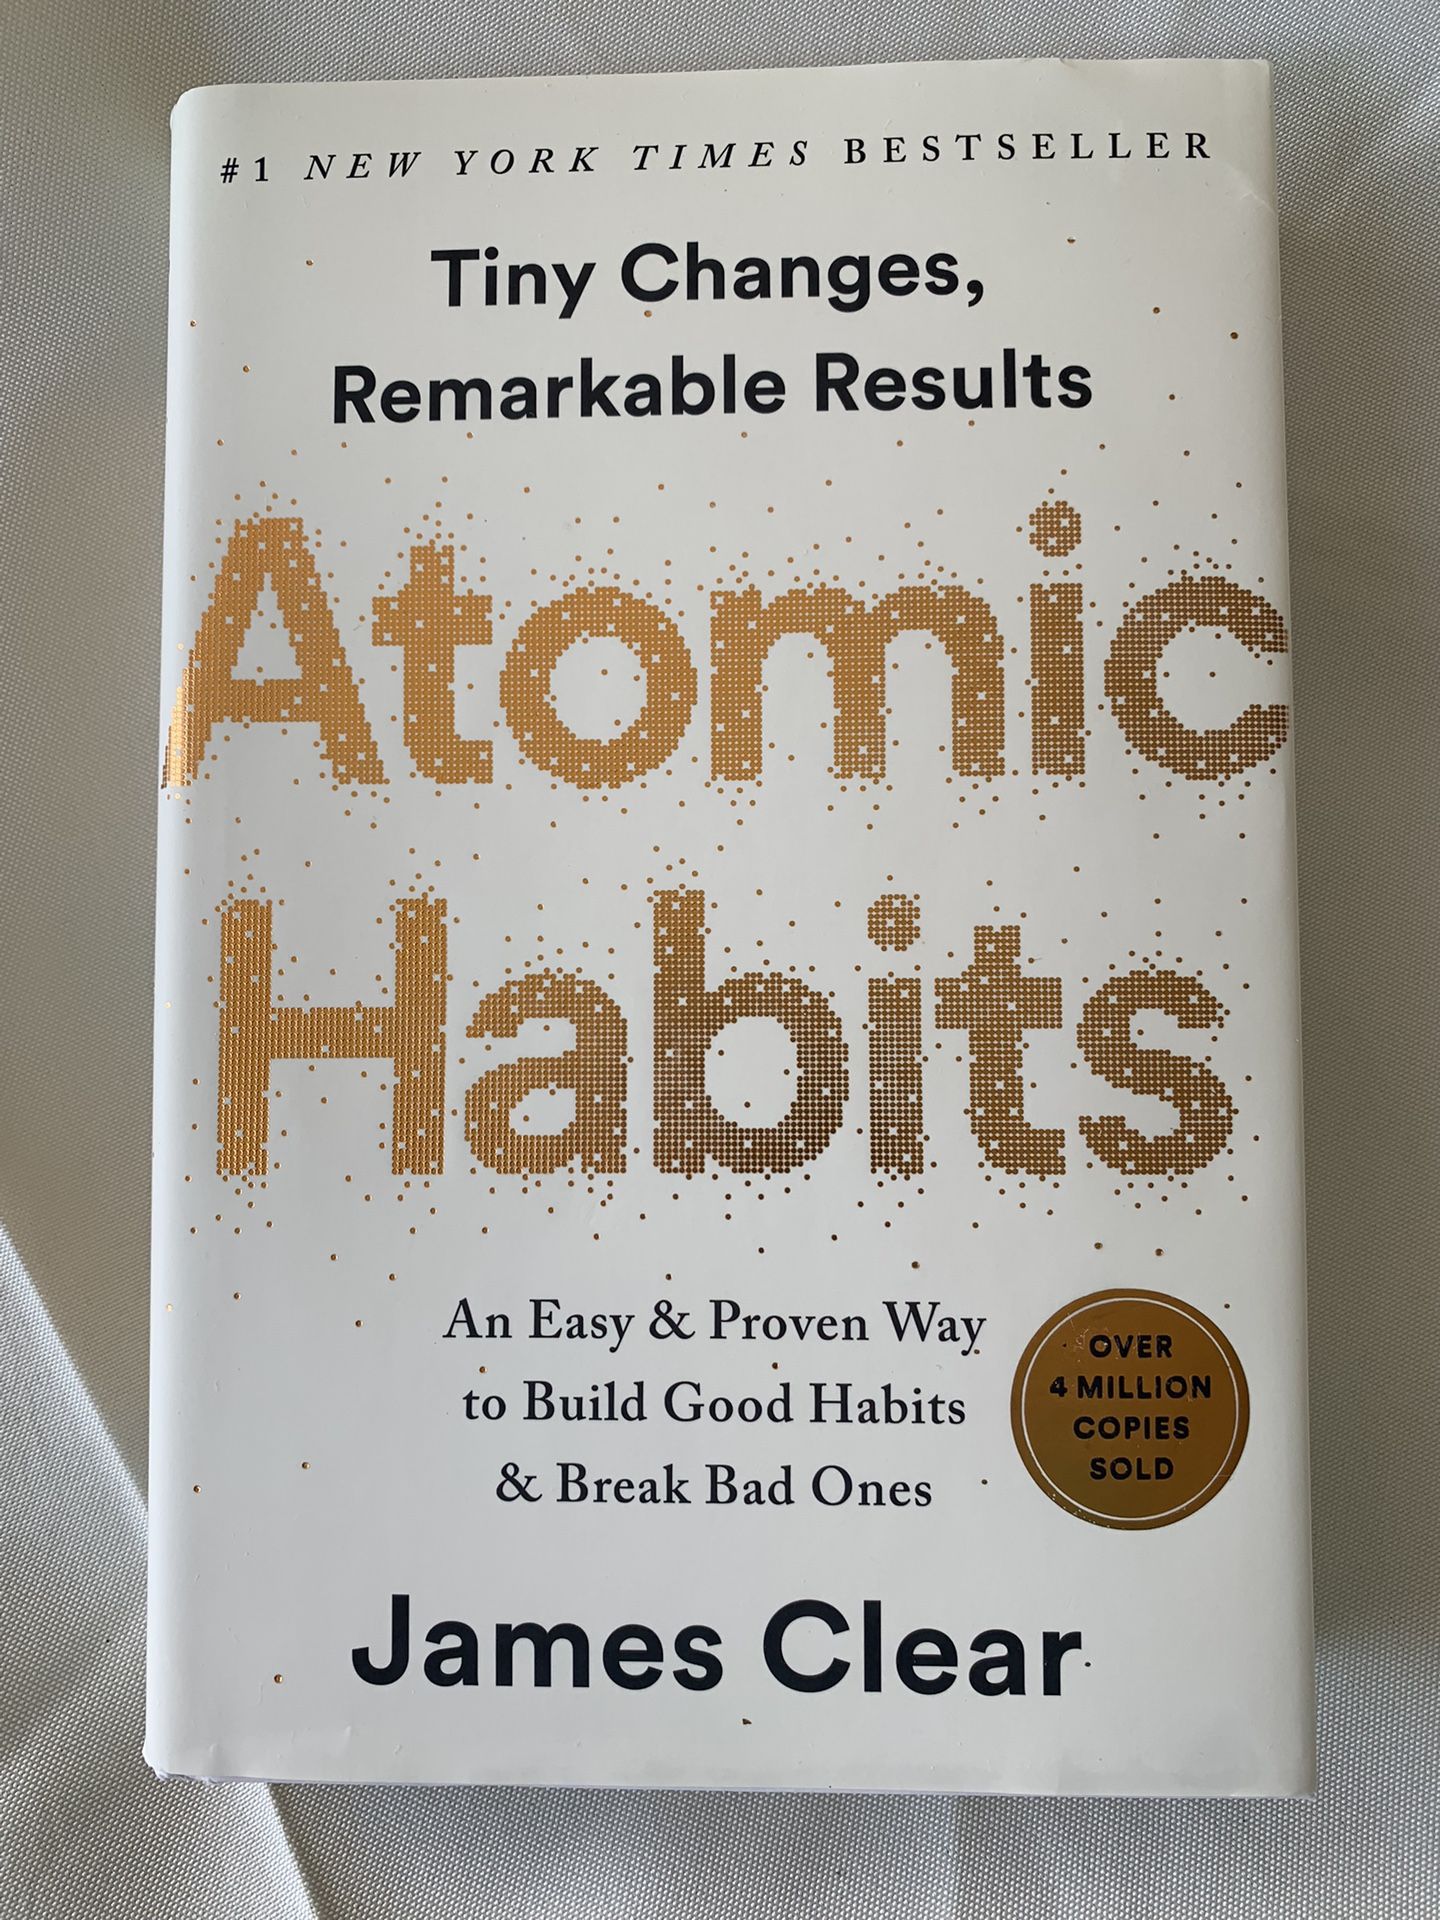 Atomic Habits James Clear Hardcover A Proven Way To Break Bad Habits And Start Healthy New Ones! Best Price New!